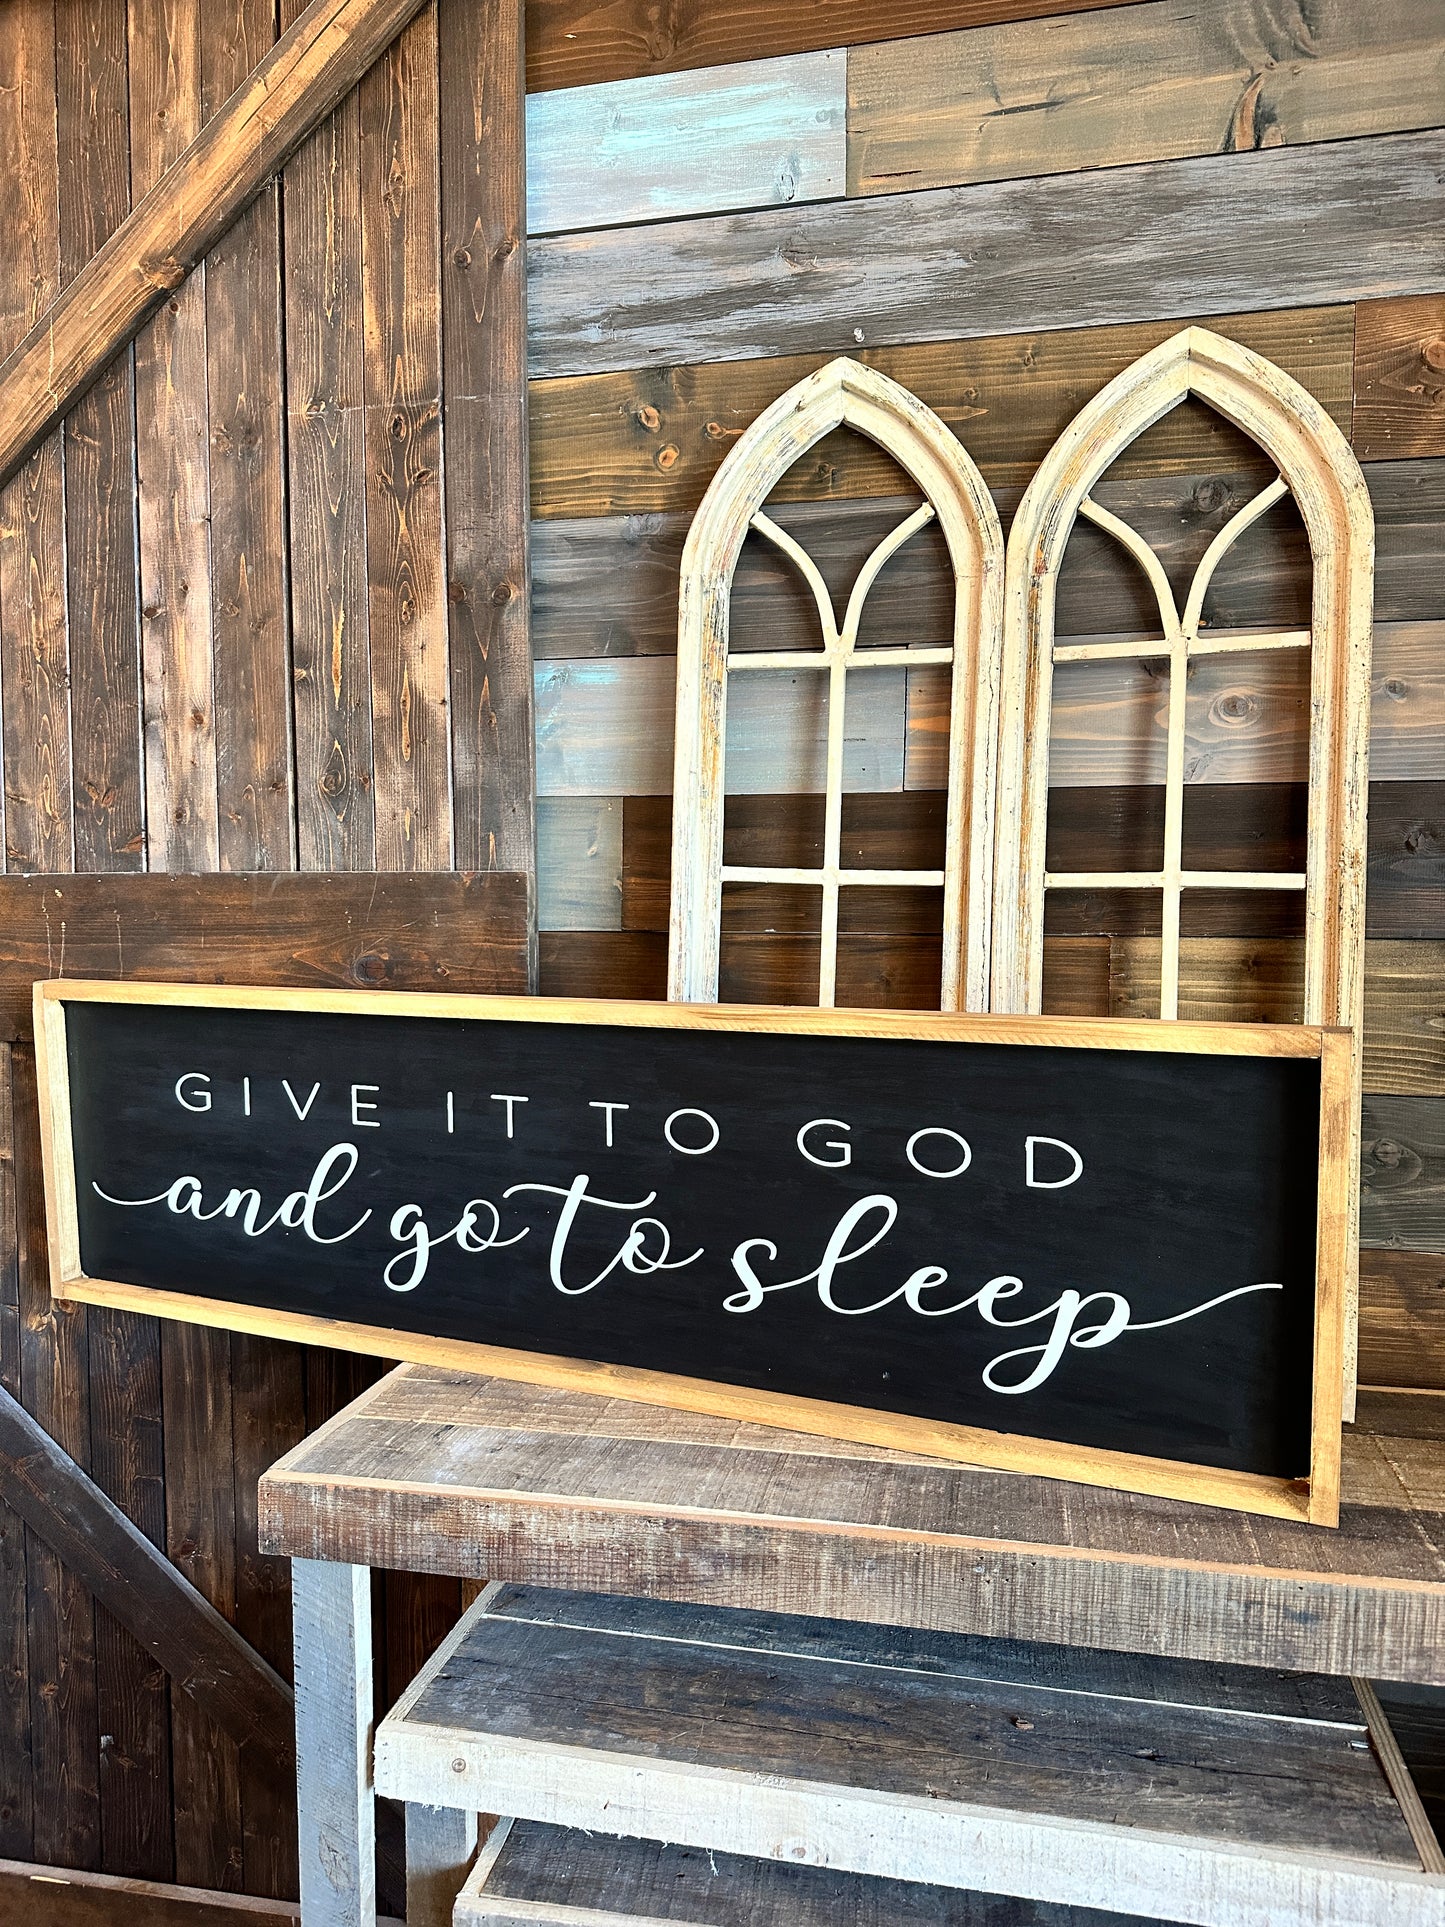 PAINTED - Give It To God and Go To Sleep(12x48" Large Framed Plank) - Paisley Grace Makery